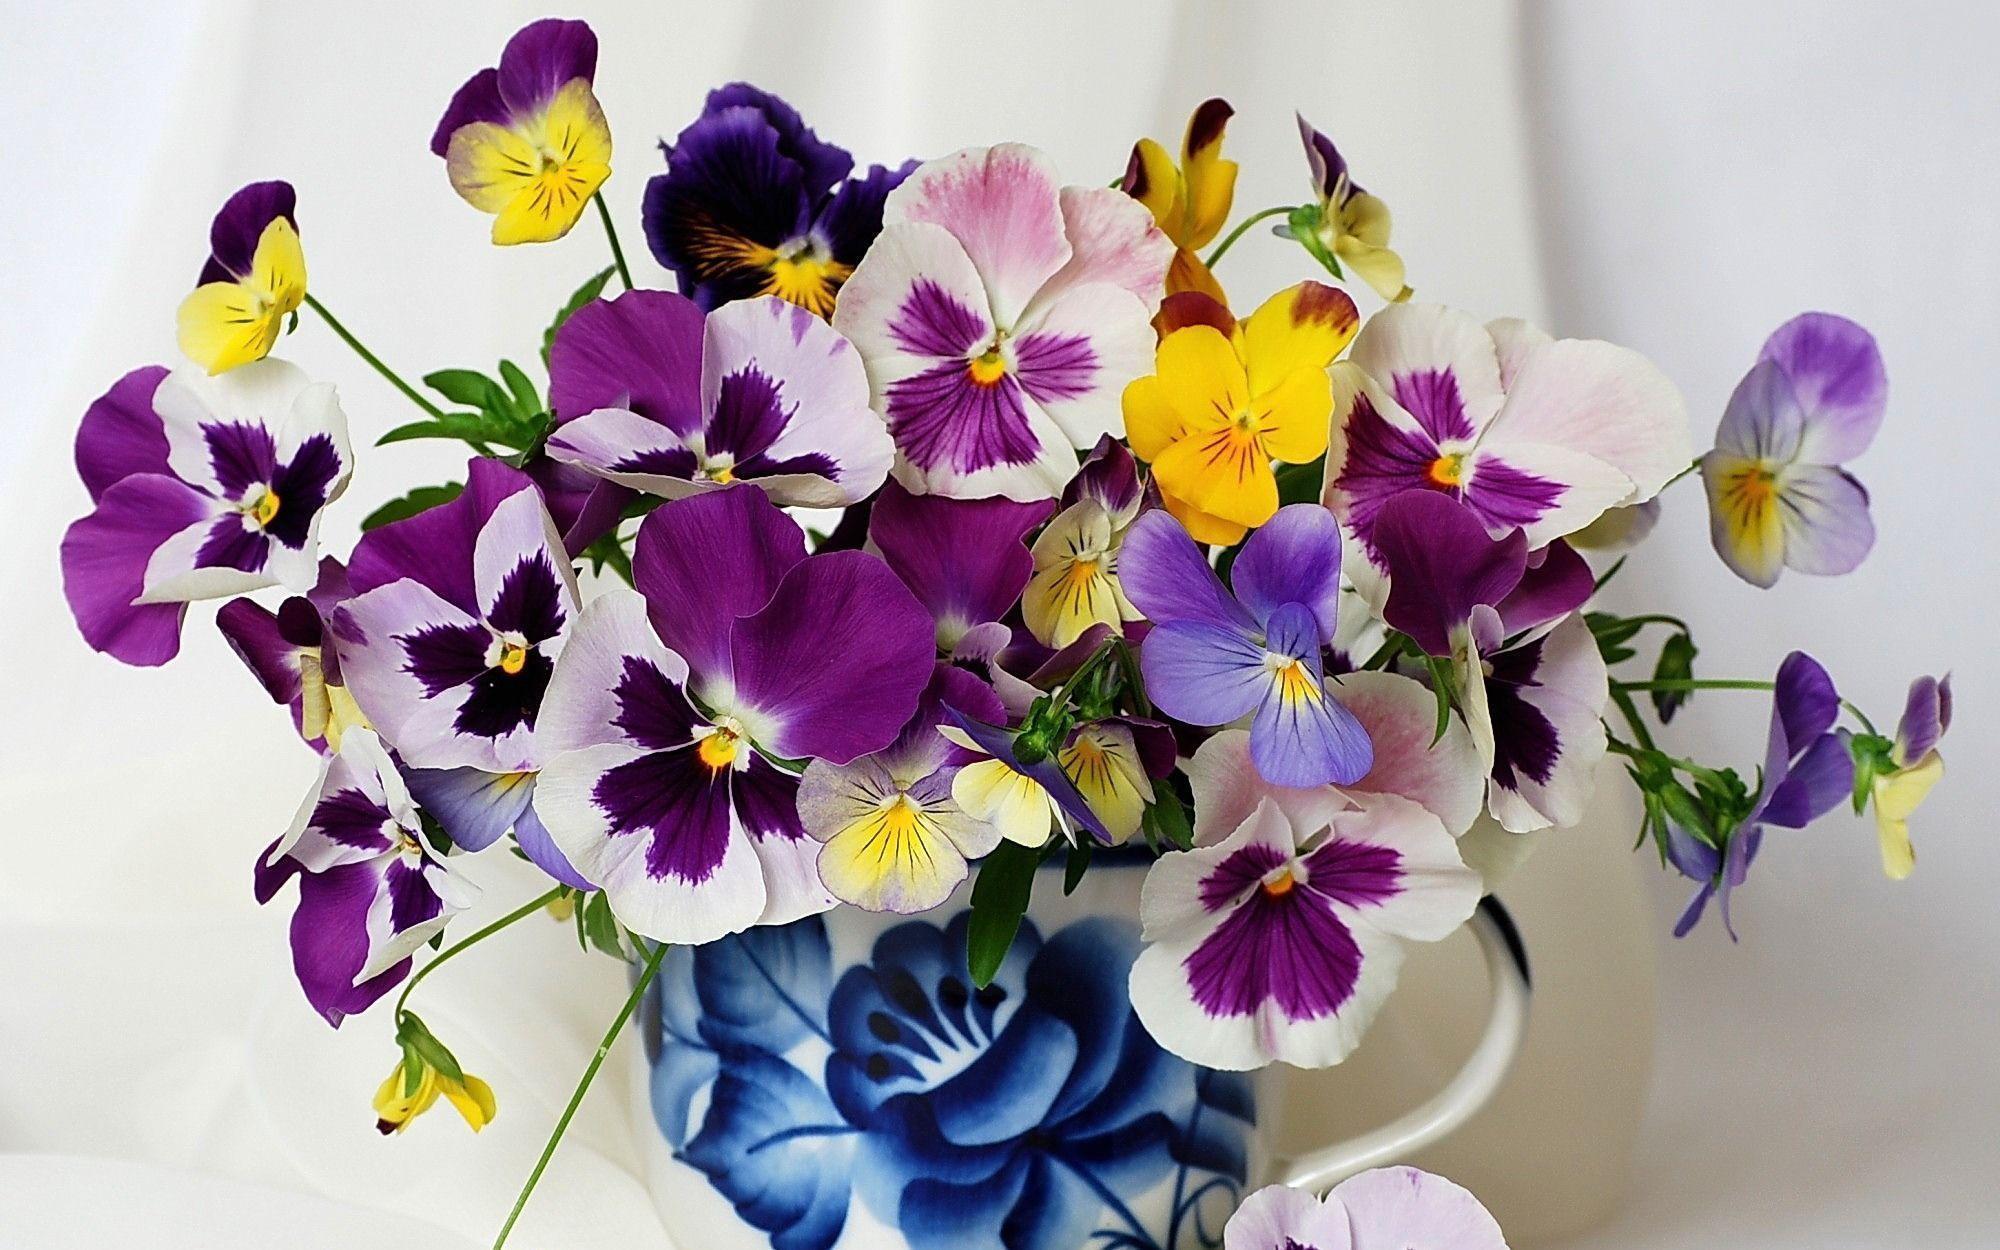 Bouquet of flowers viola (violet, pansy) wallpaper and image